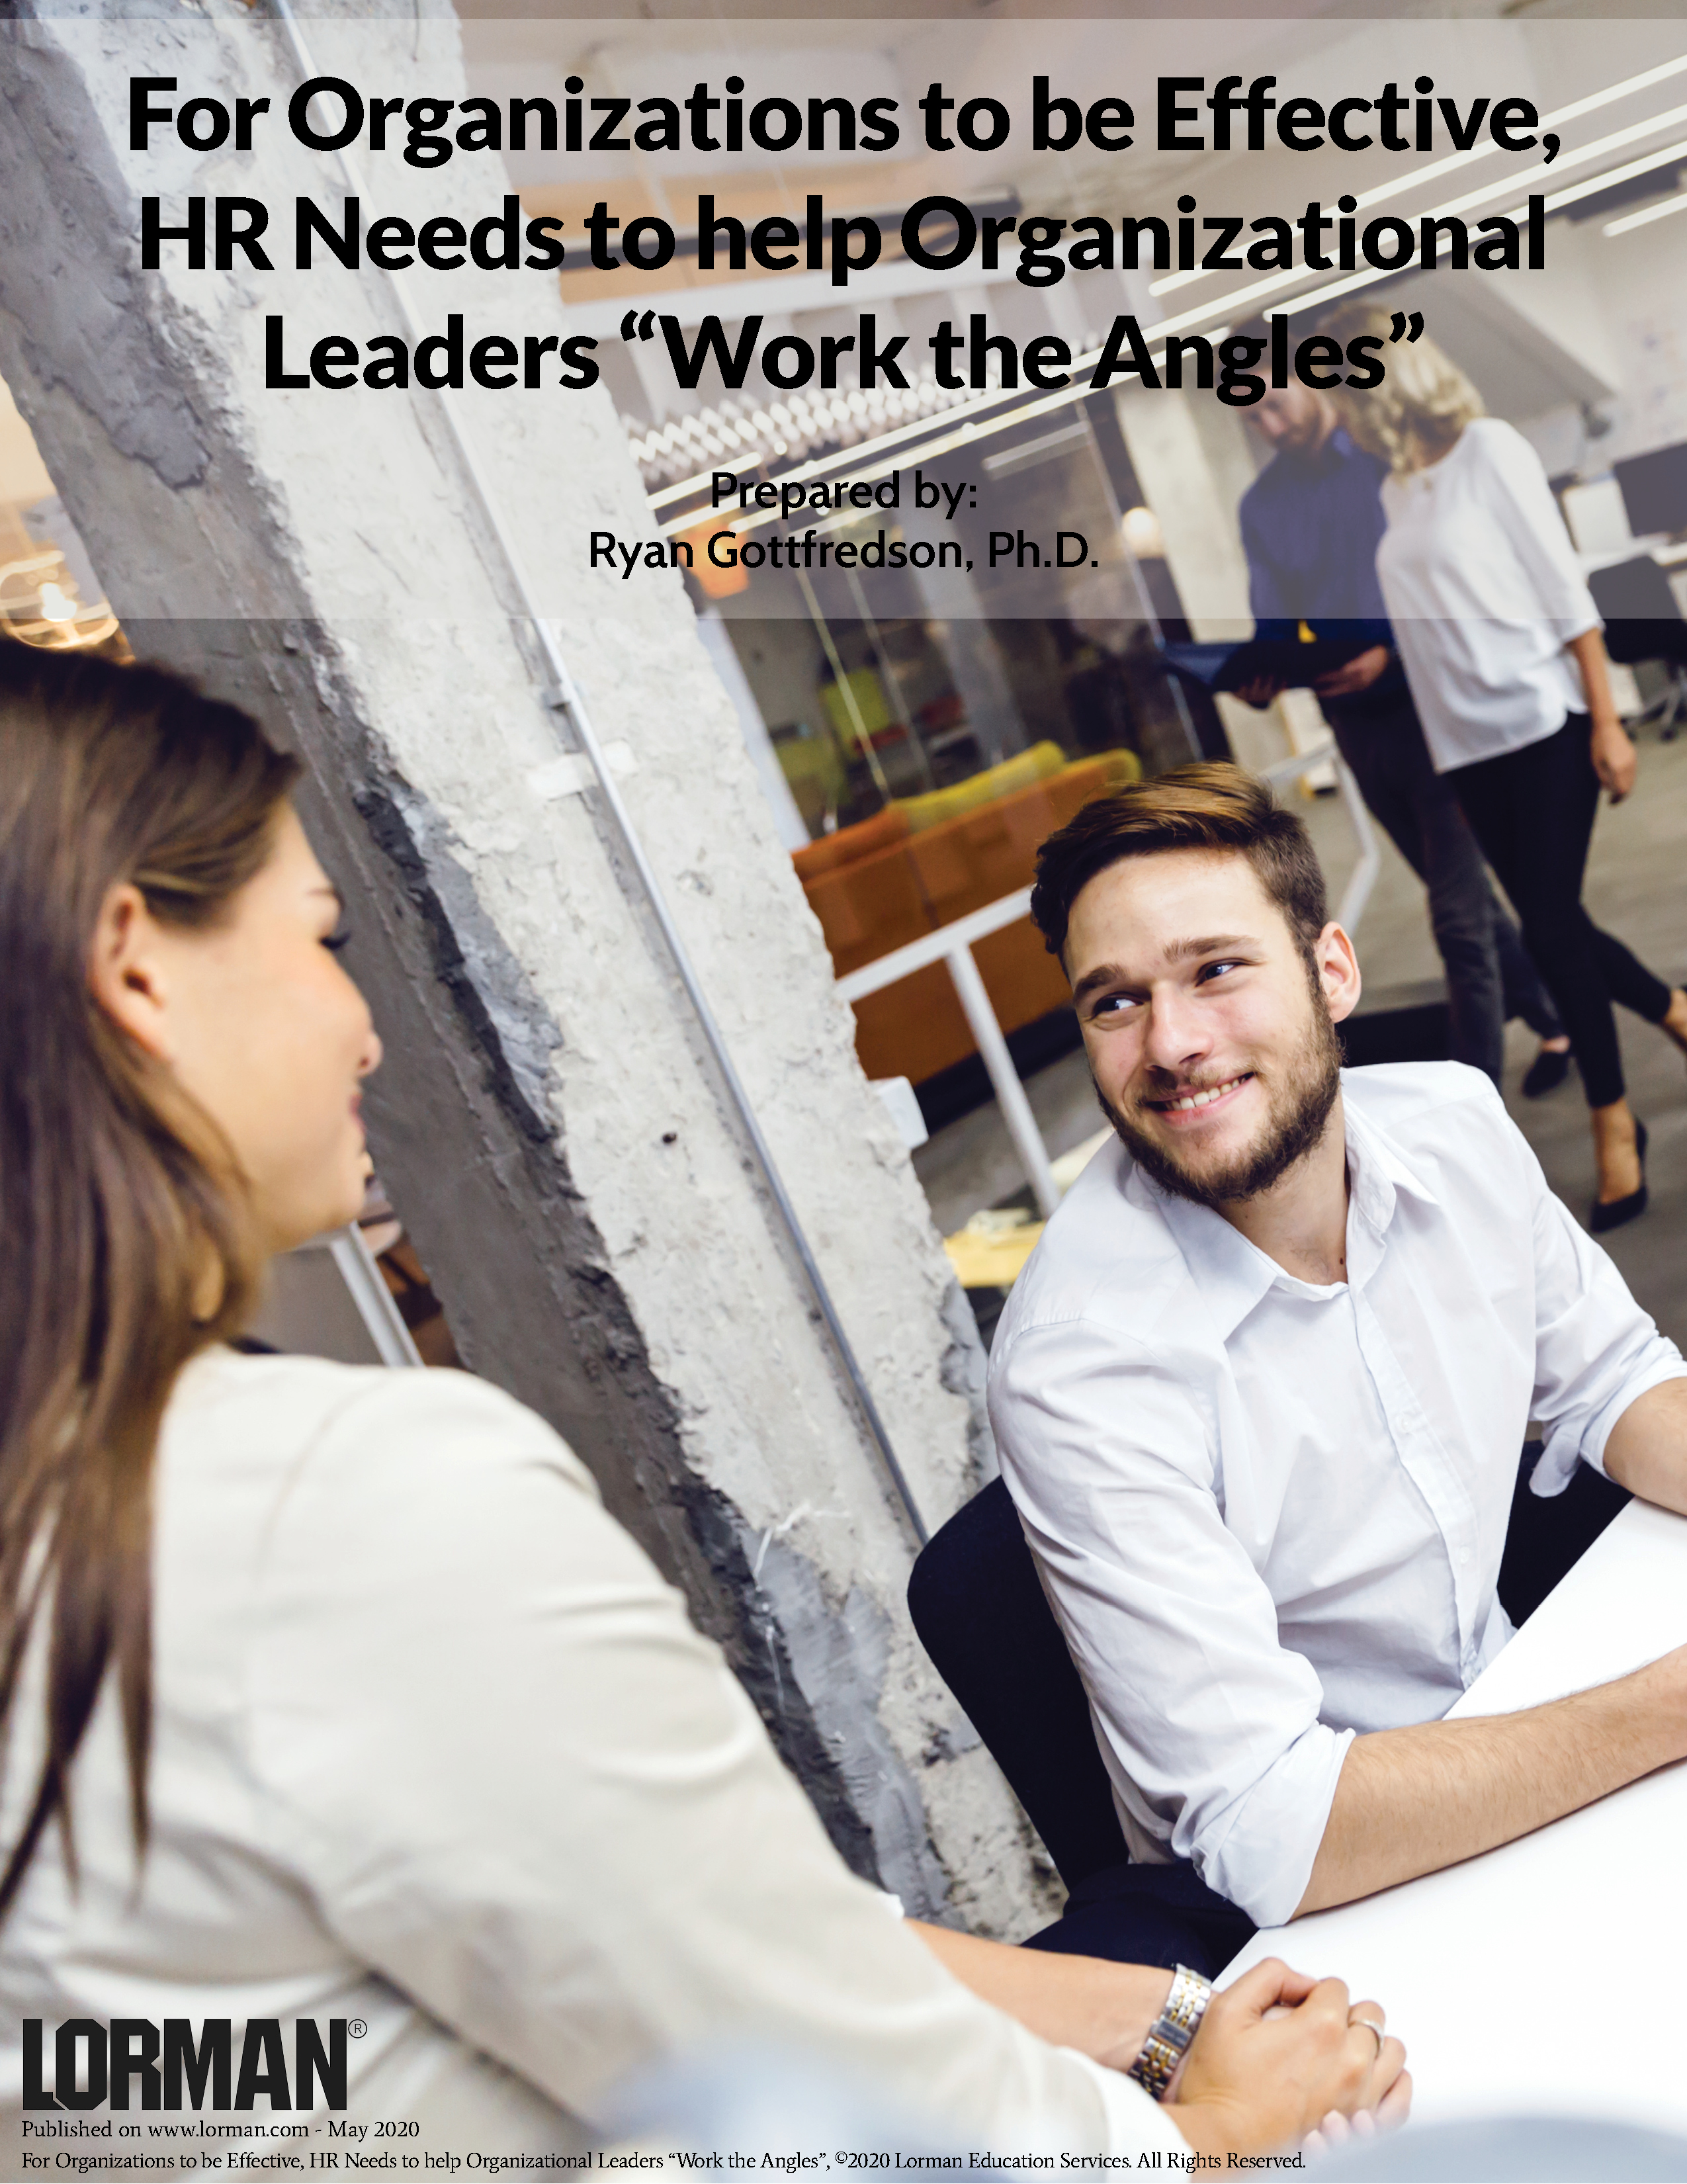 For Organizations to be Effective,  HR Needs to help Organizational Leaders “Work the Angles”